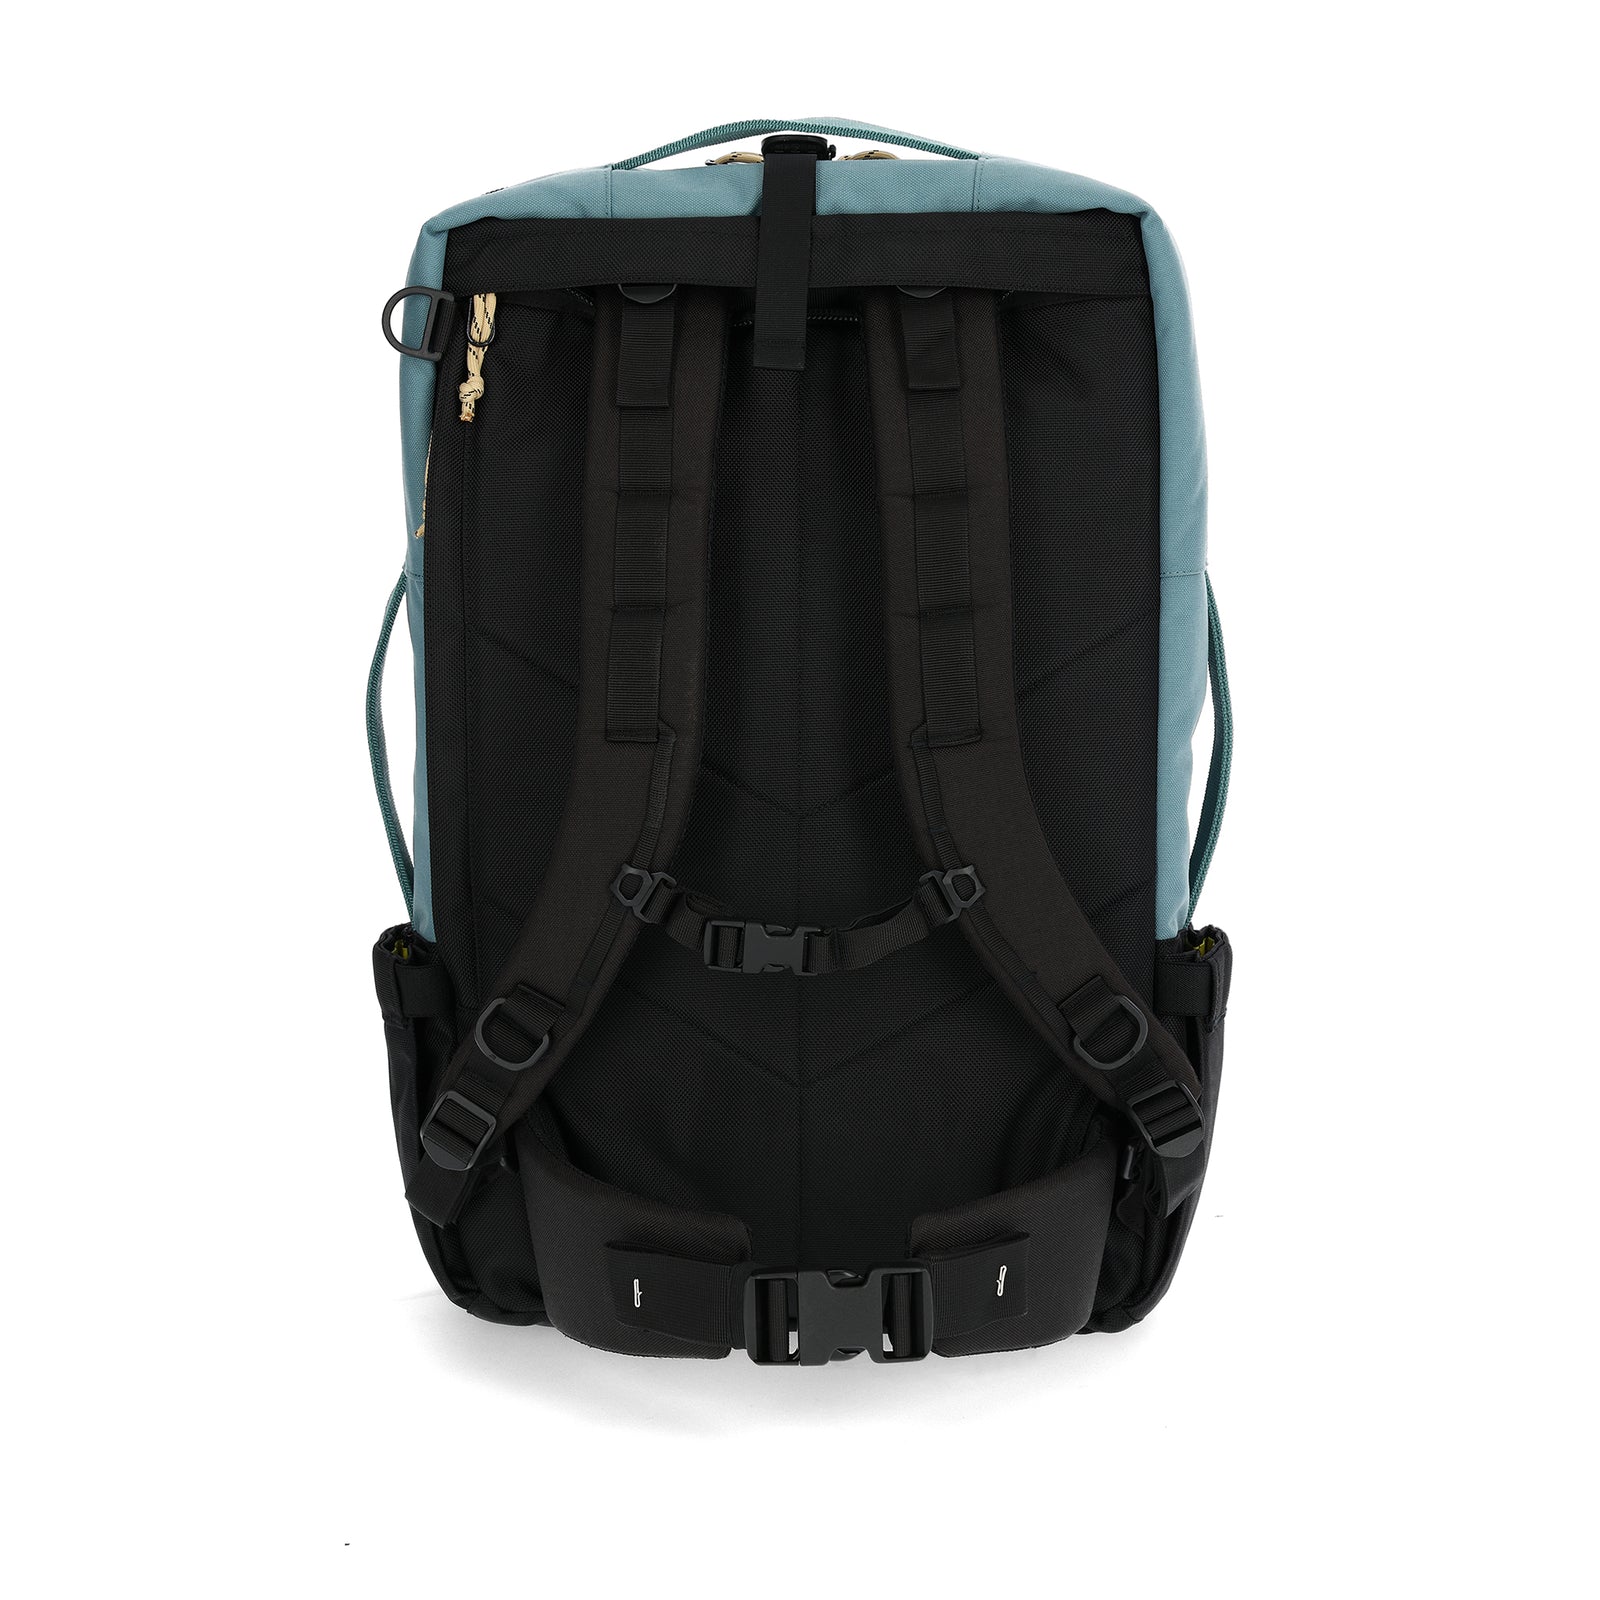 Back View of Topo Designs Global Travel Bag 40L  in "Sea Pine"